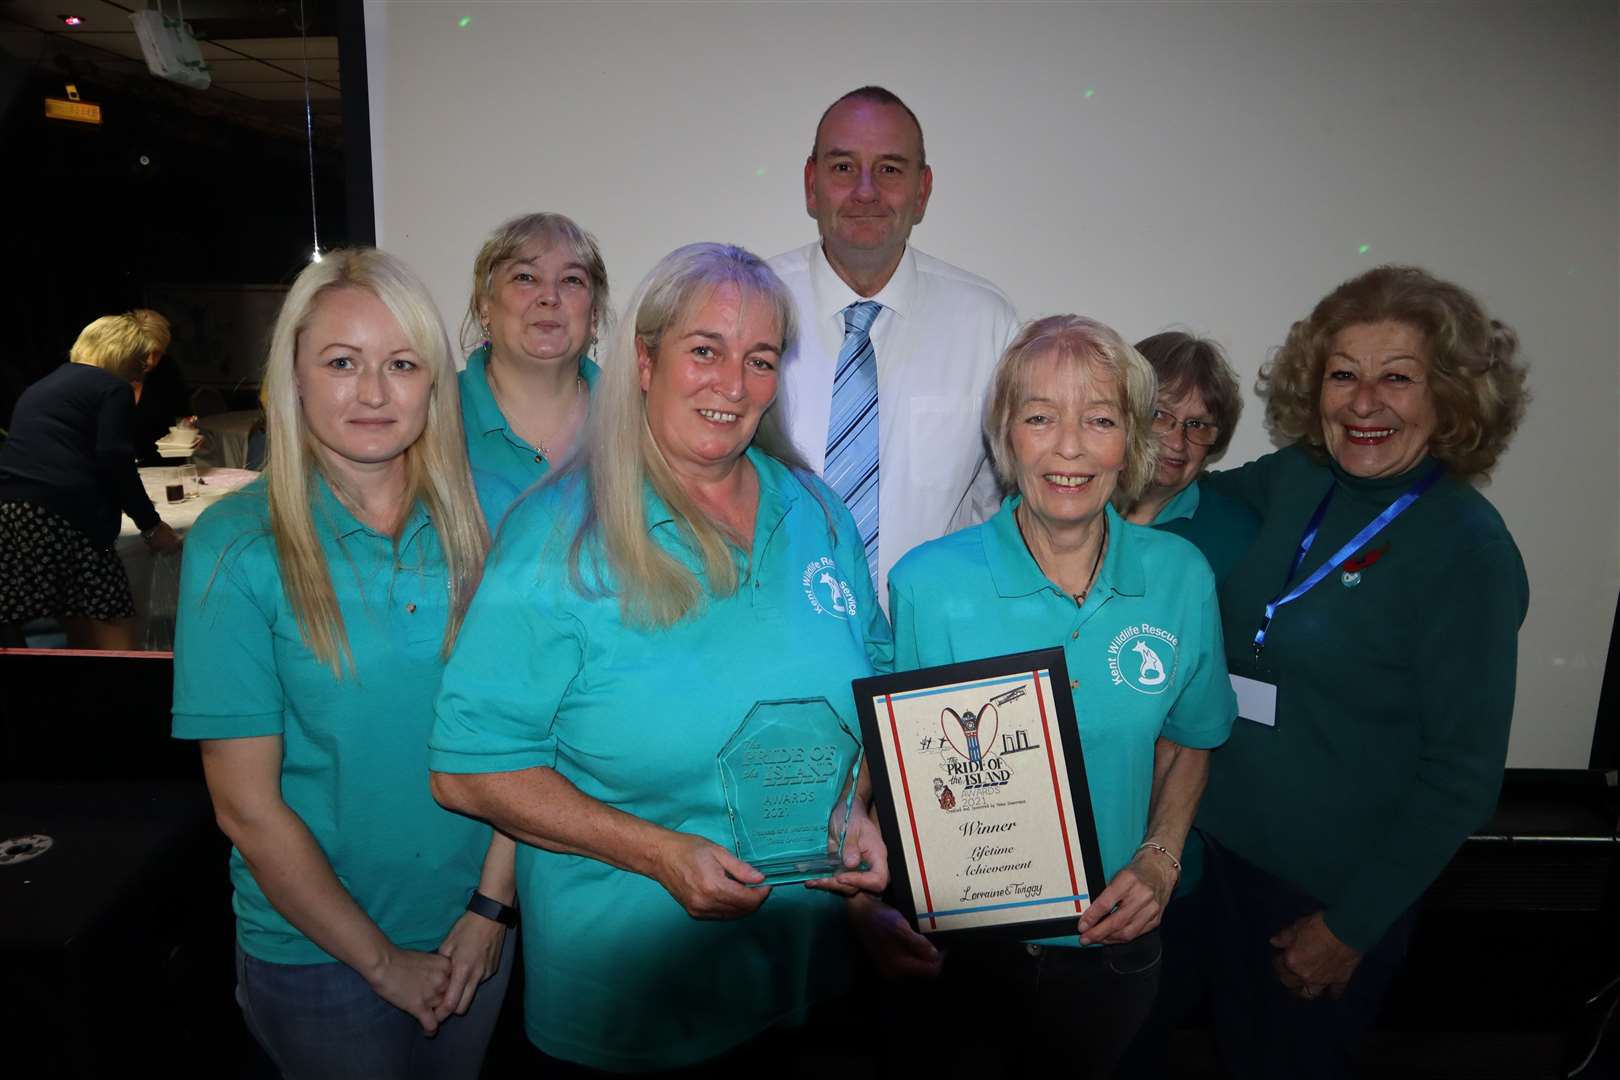 Lorraine March and Twiggy Hawes of Kent Wildlife Rescue Services were given lifetime achievement awards at the Tesco Pride of the Island awards at Layzells